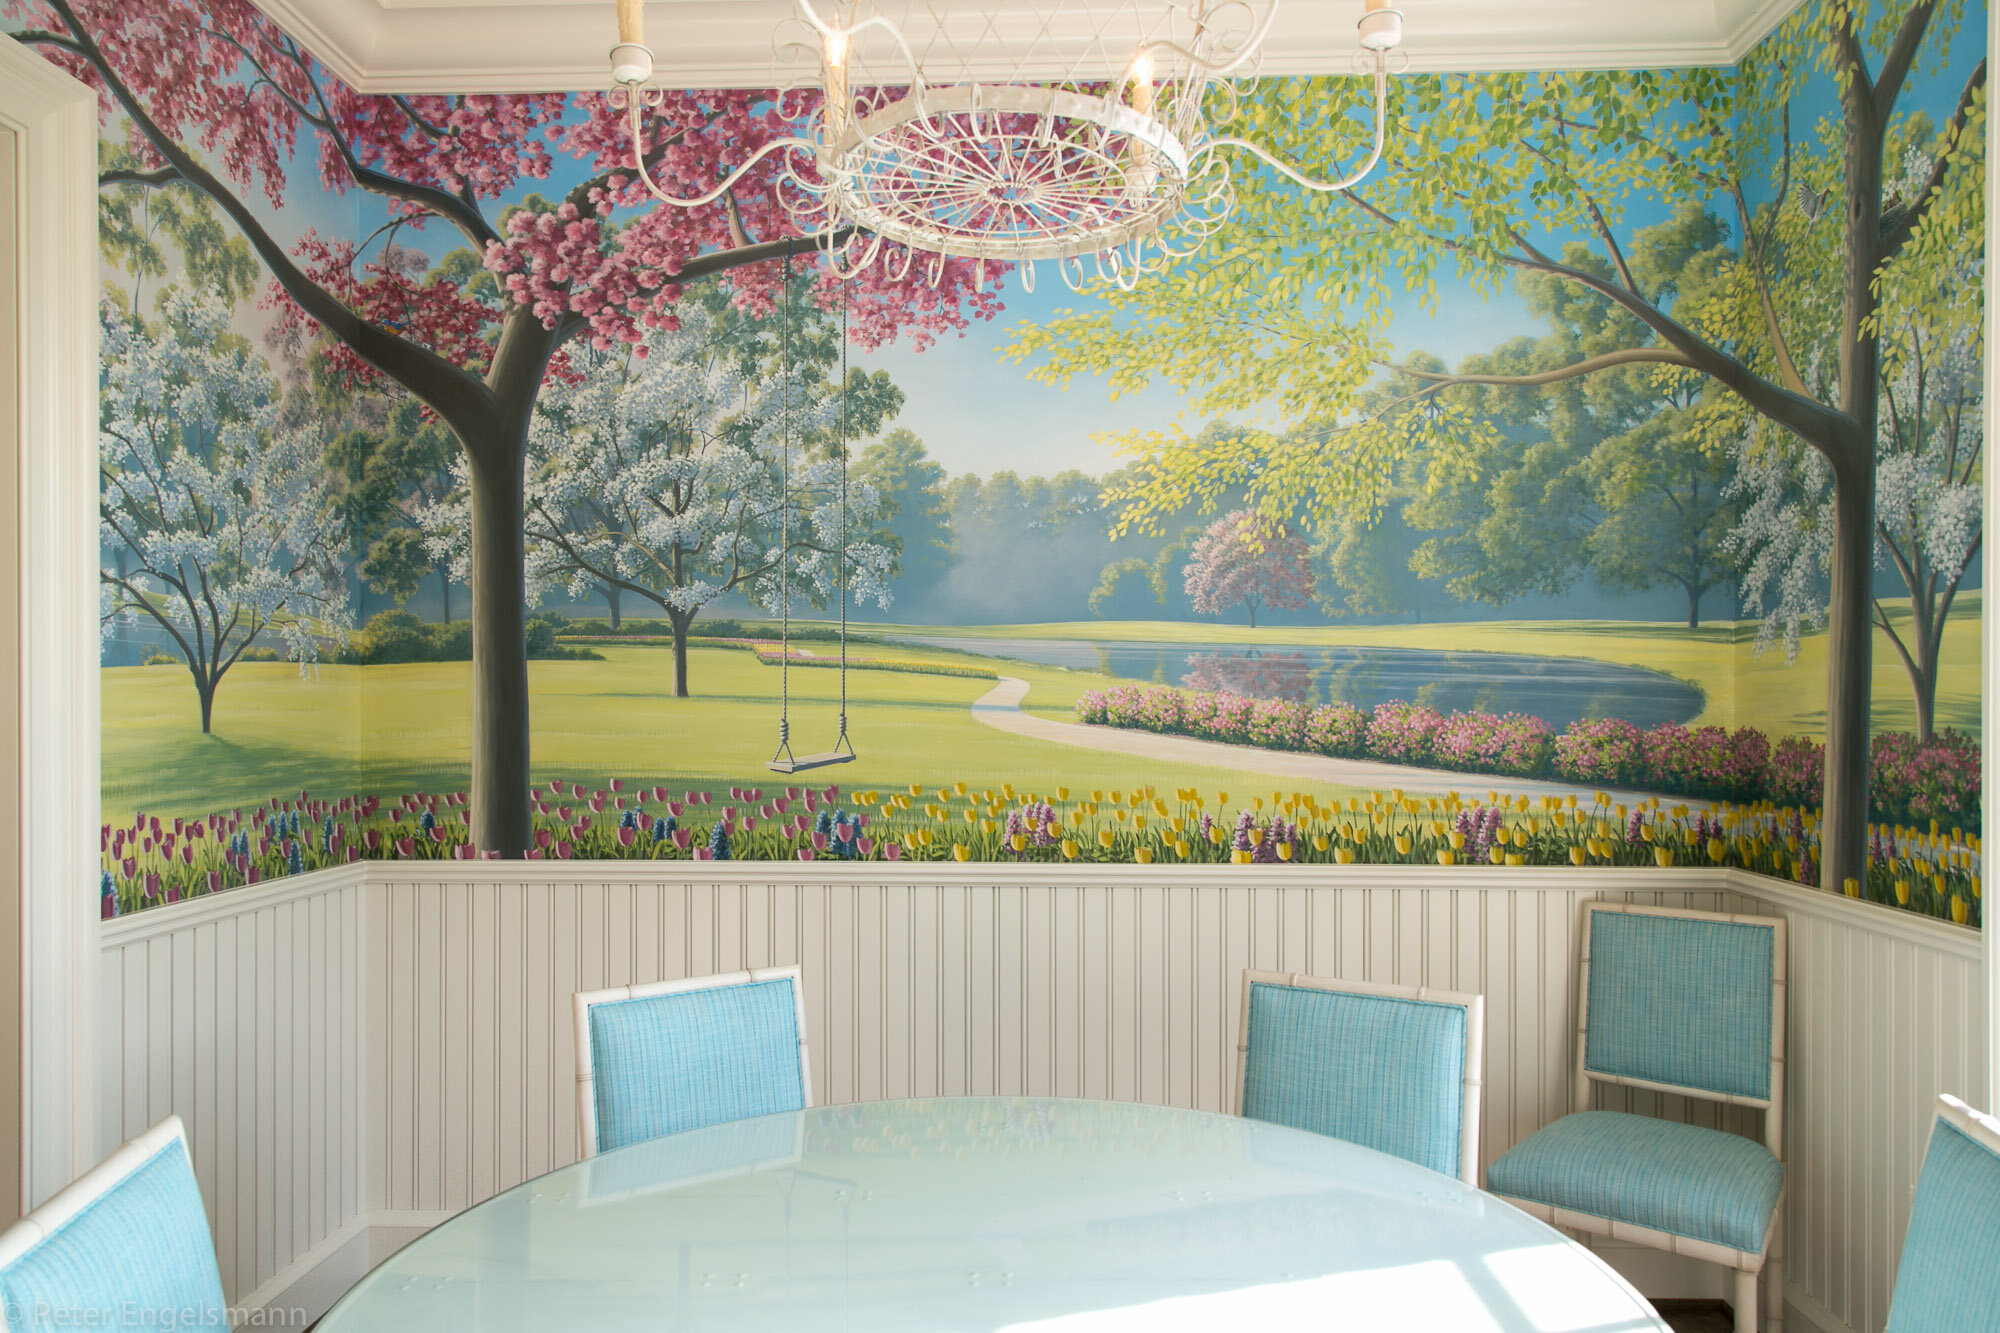  Spring Landscape Mural, acrylic on wallboard, private residence. © Peter K. Engelsmann 